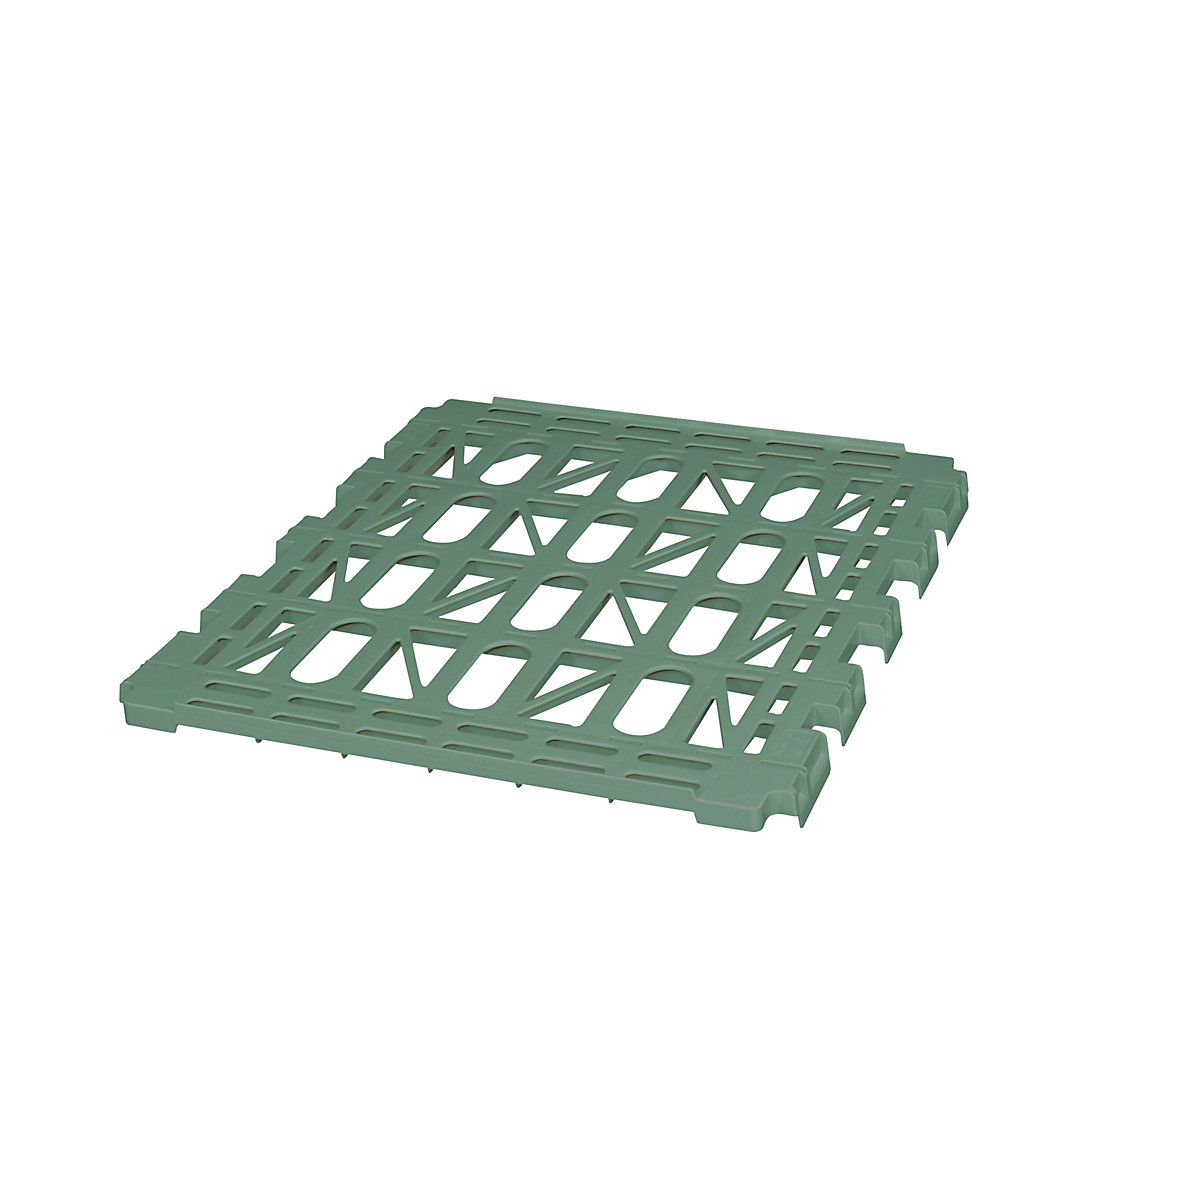 Intermediate shelf for roll container, 4-sided, width 710 mm, traffic green